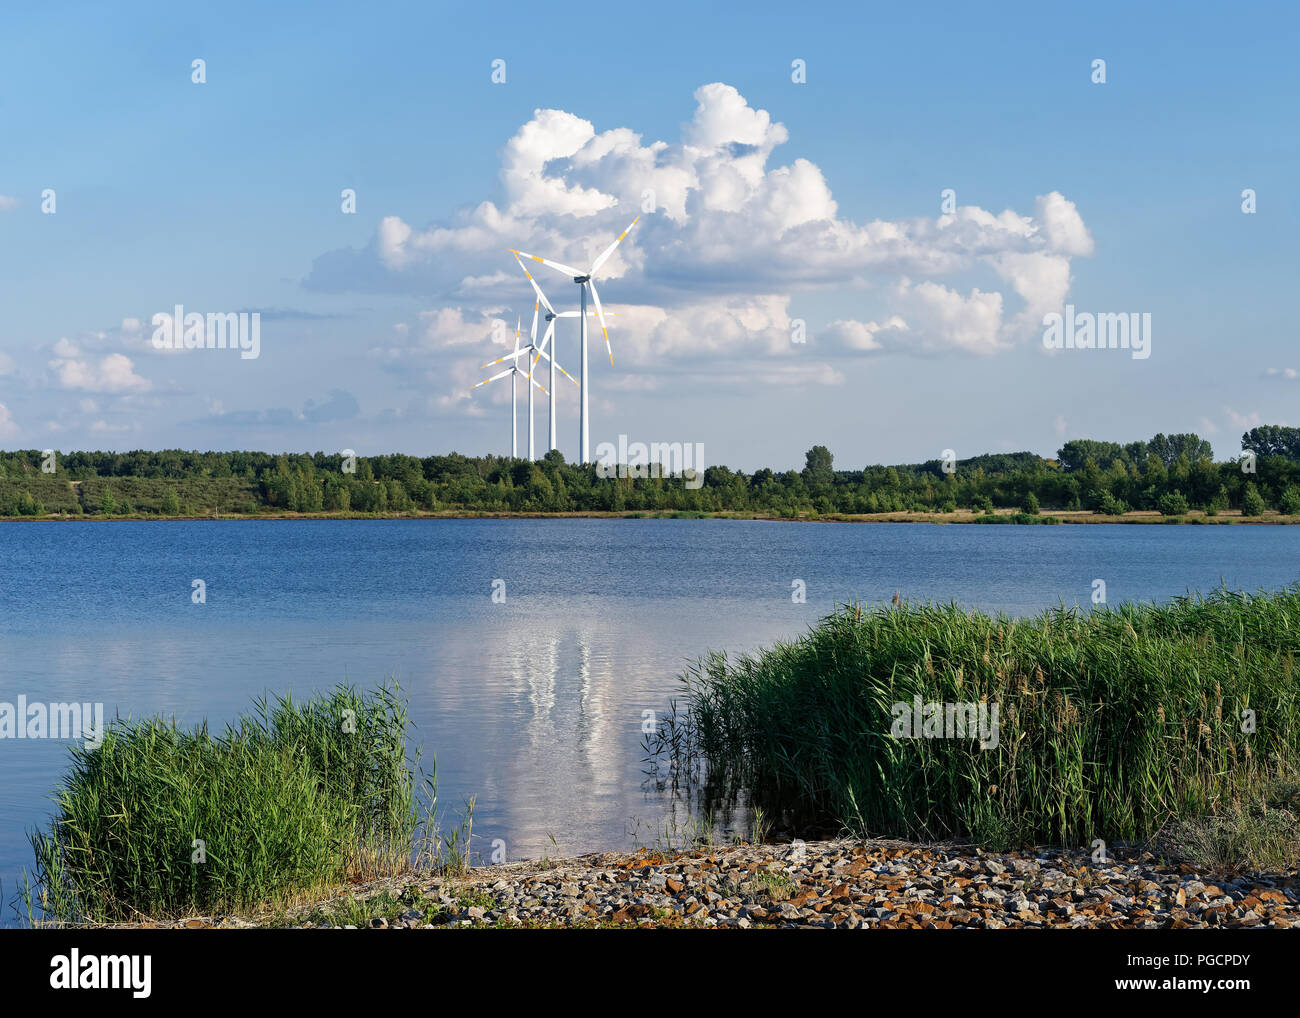 Several wind turbines stand in front of a huge cloud formation at the shore of a lake, warm summer weather Stock Photo